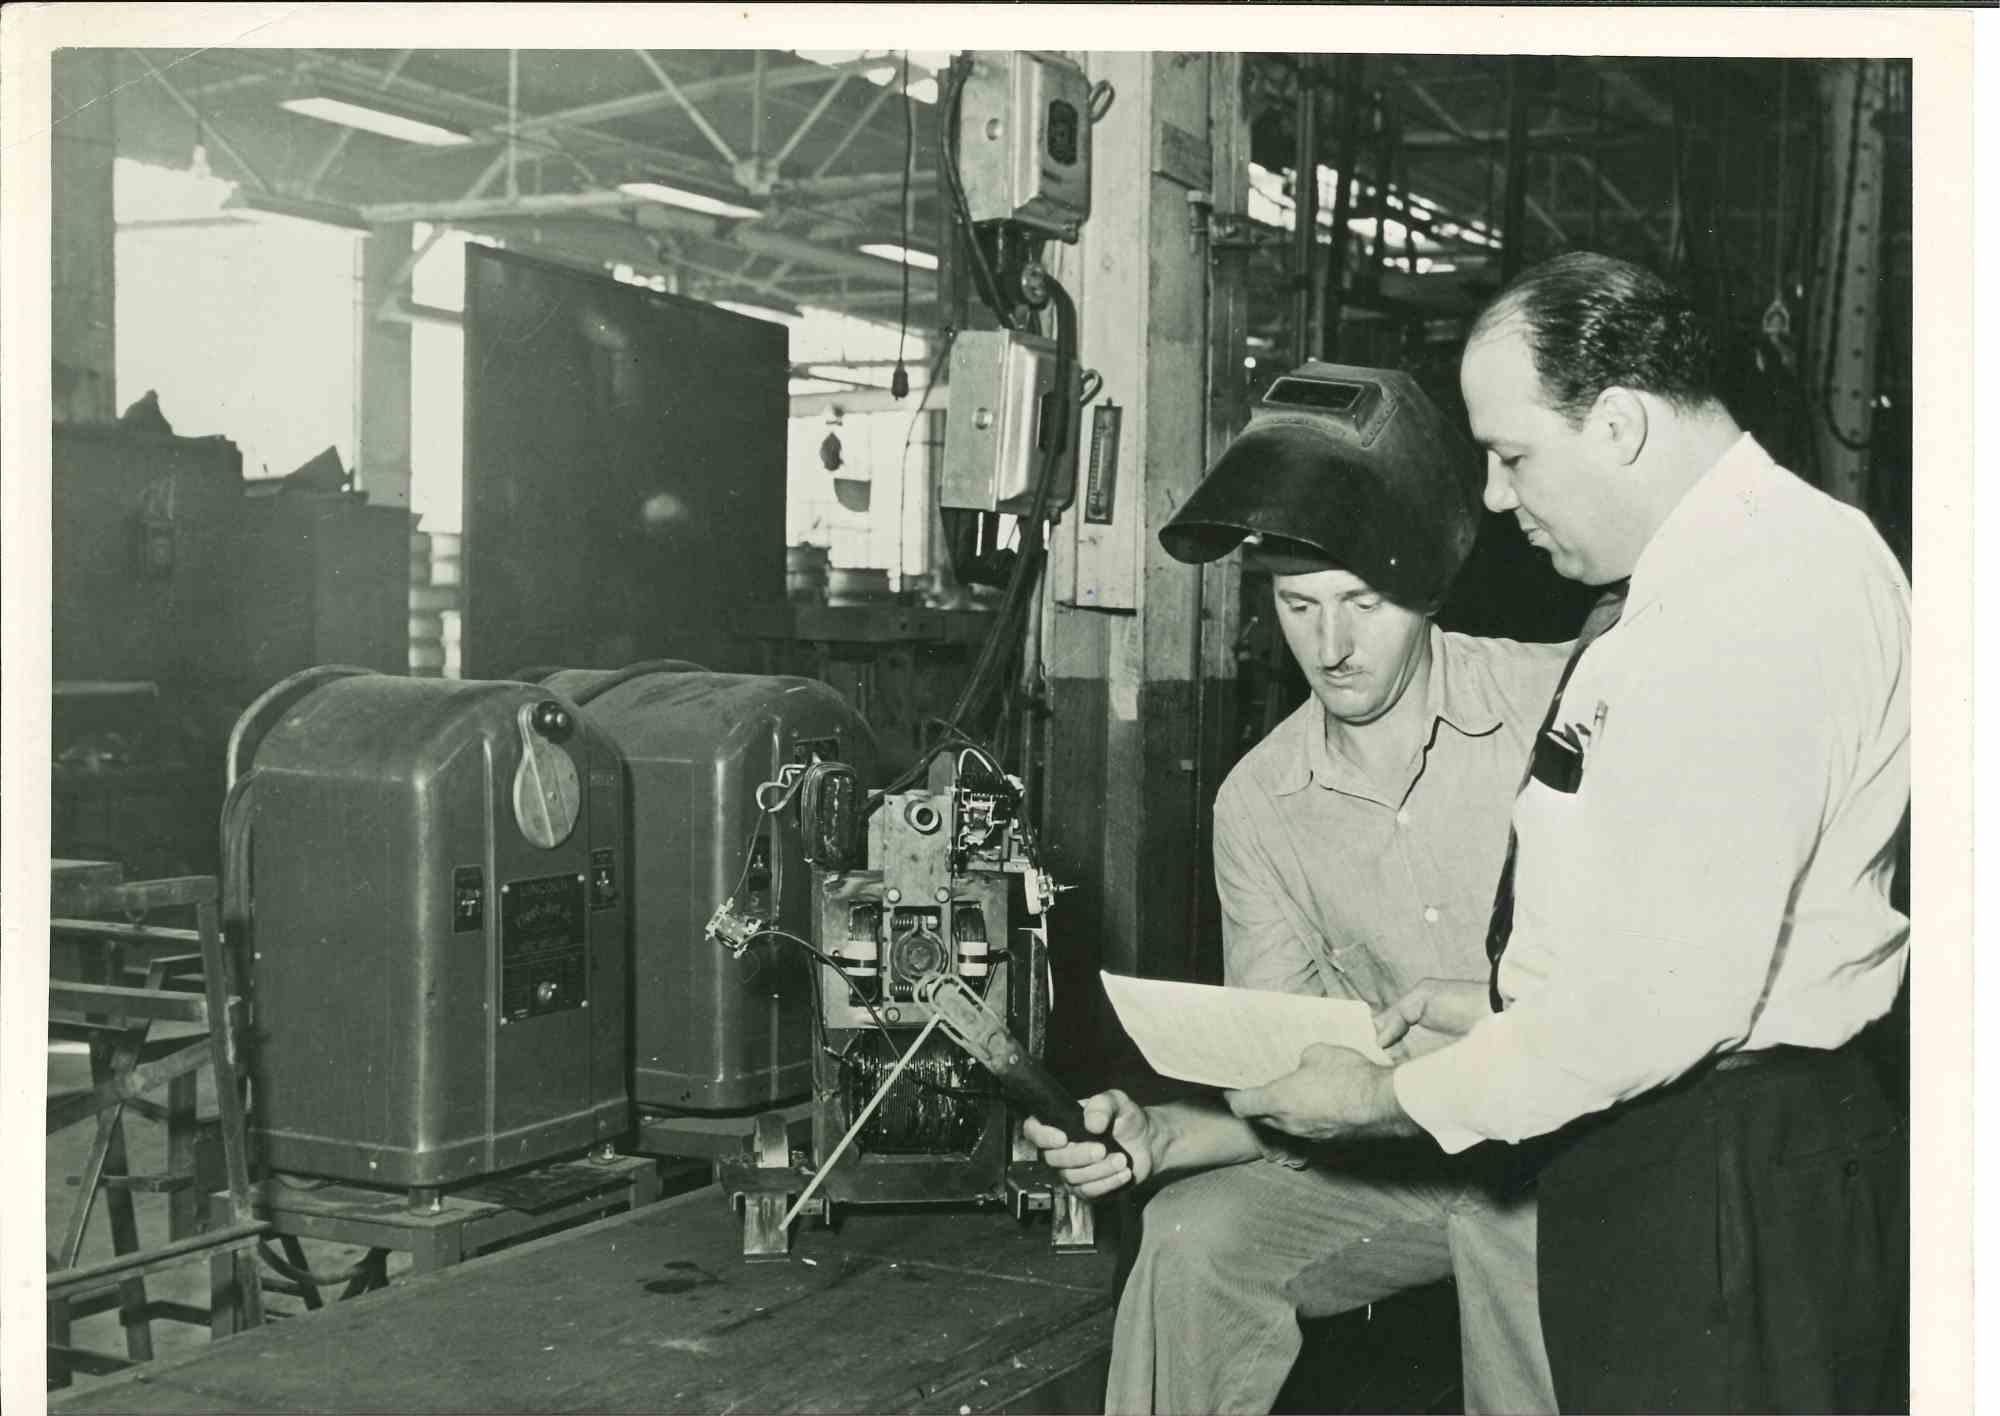 Unknown Figurative Photograph - Ted Meyer at the Lincoln Electric Company -Vintage Photograph - Mid 20th Century